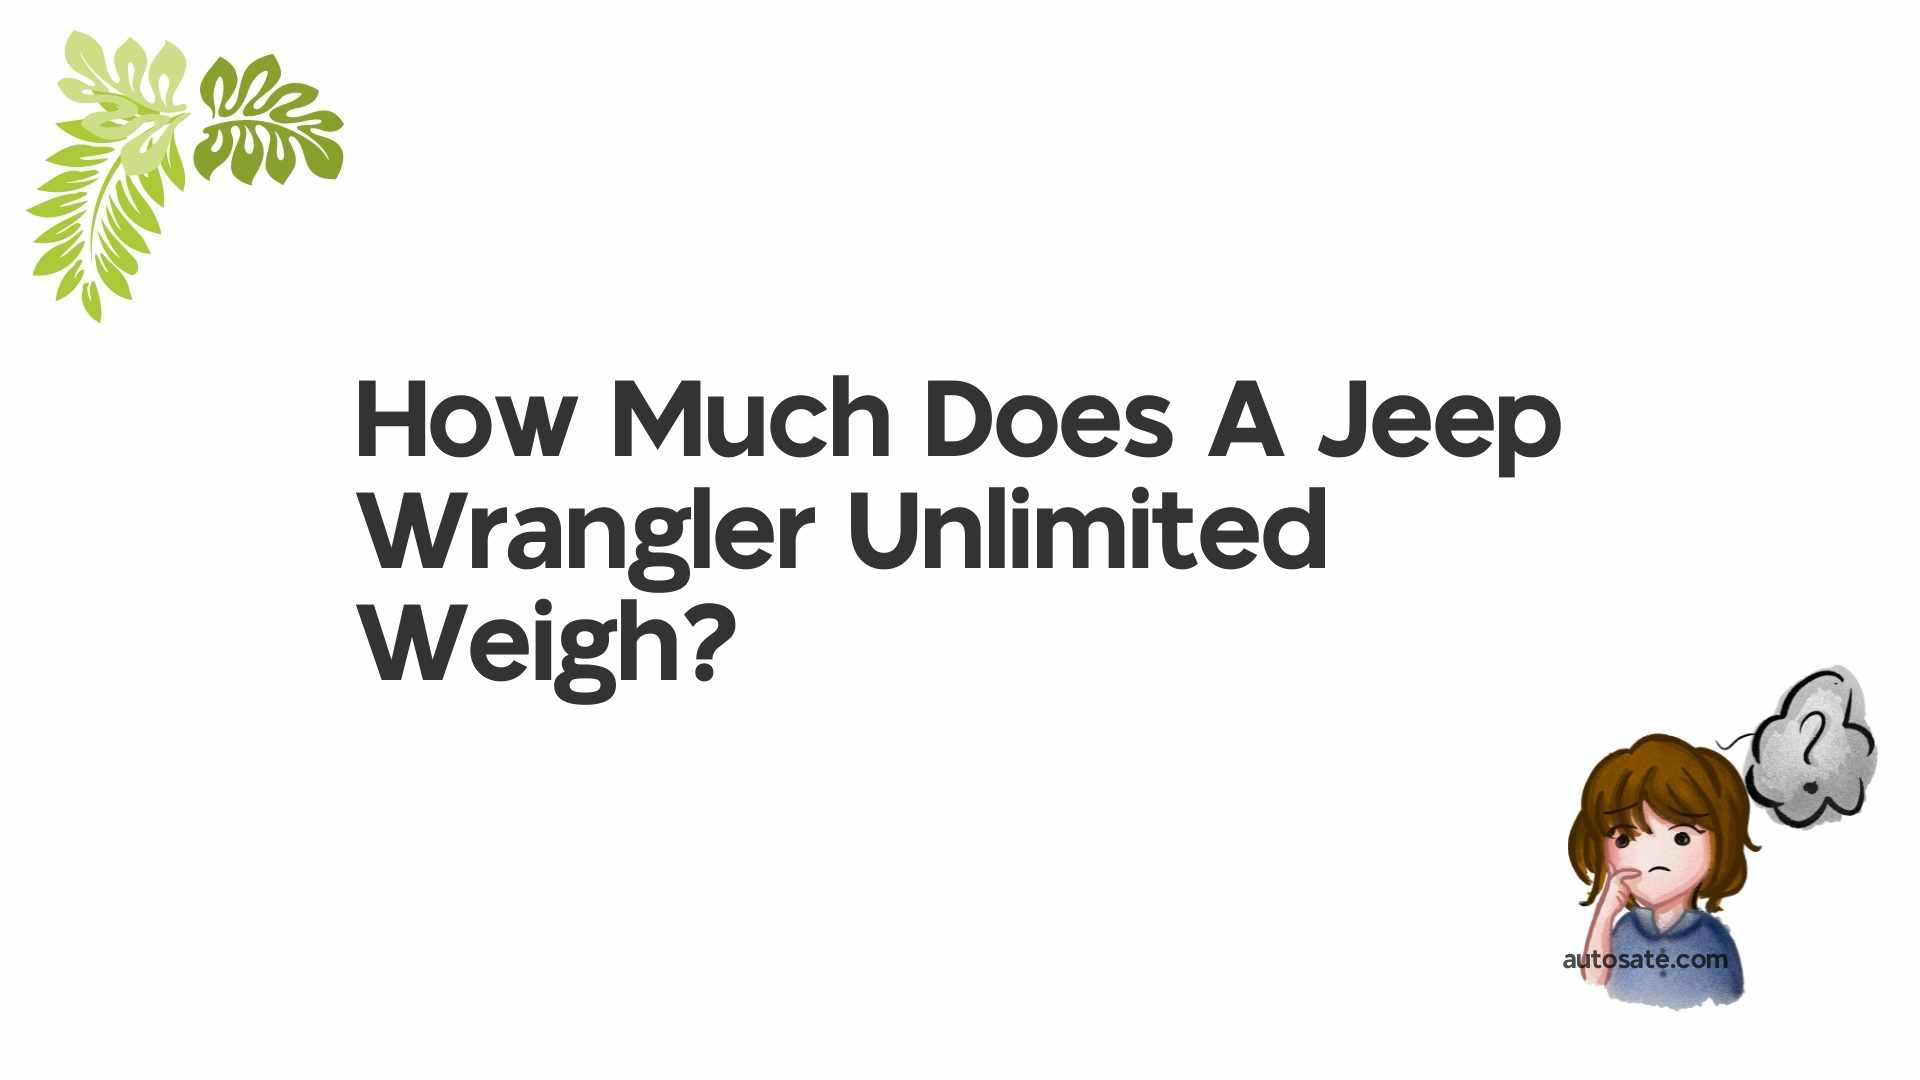 How Much Does A Jeep Wrangler Unlimited Weigh?